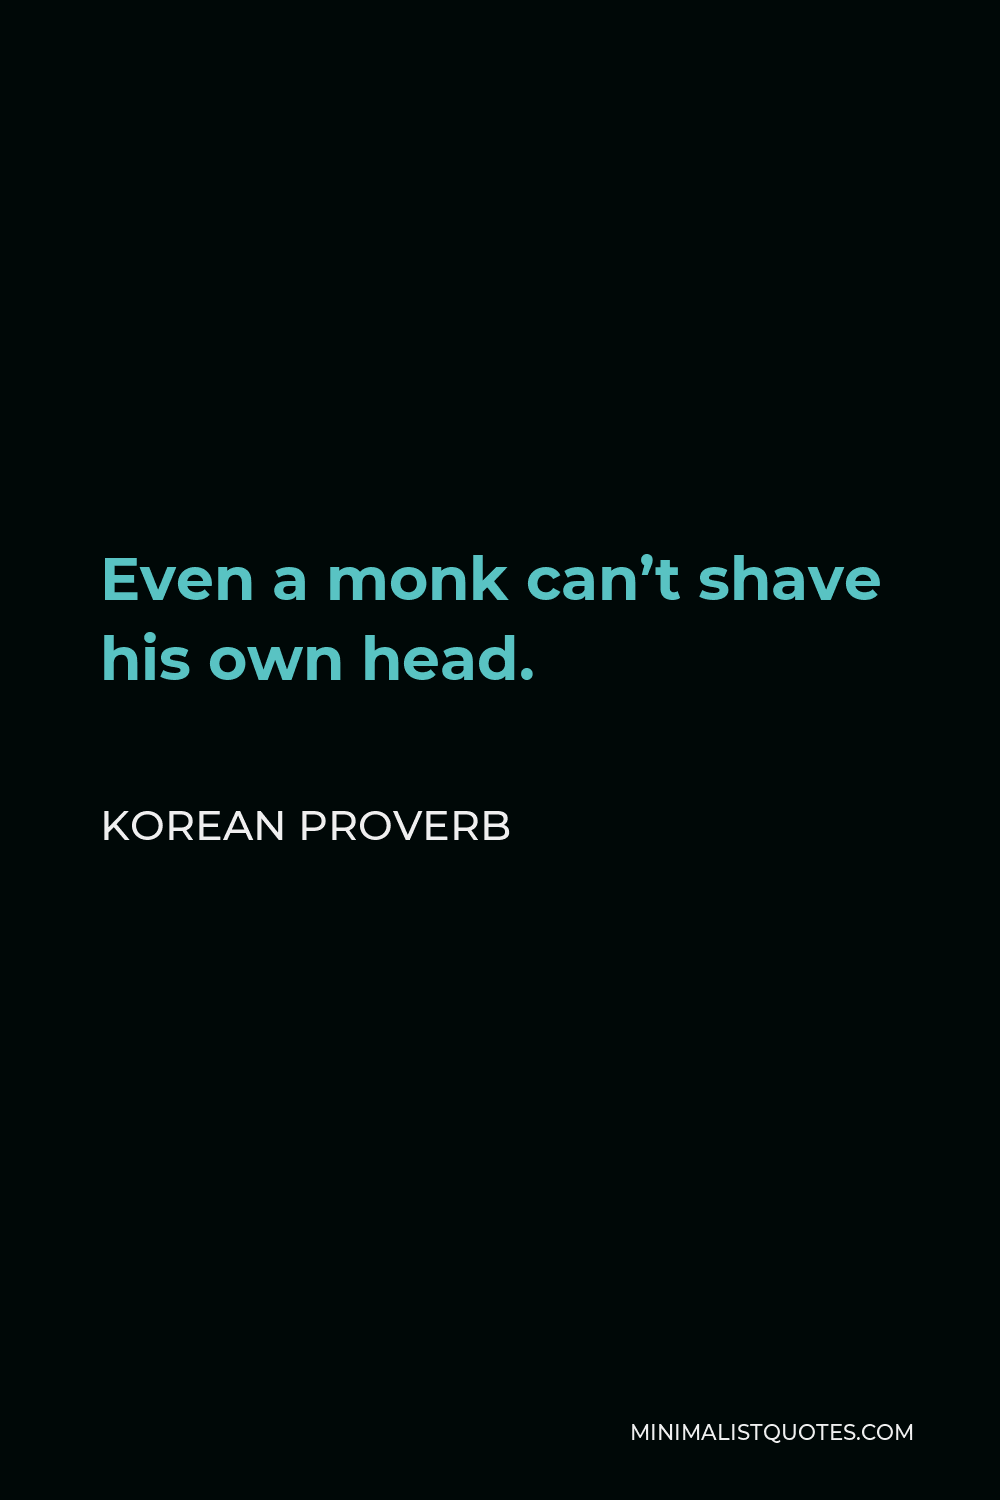 Korean Proverb Quote - Even a monk can’t shave his own head.